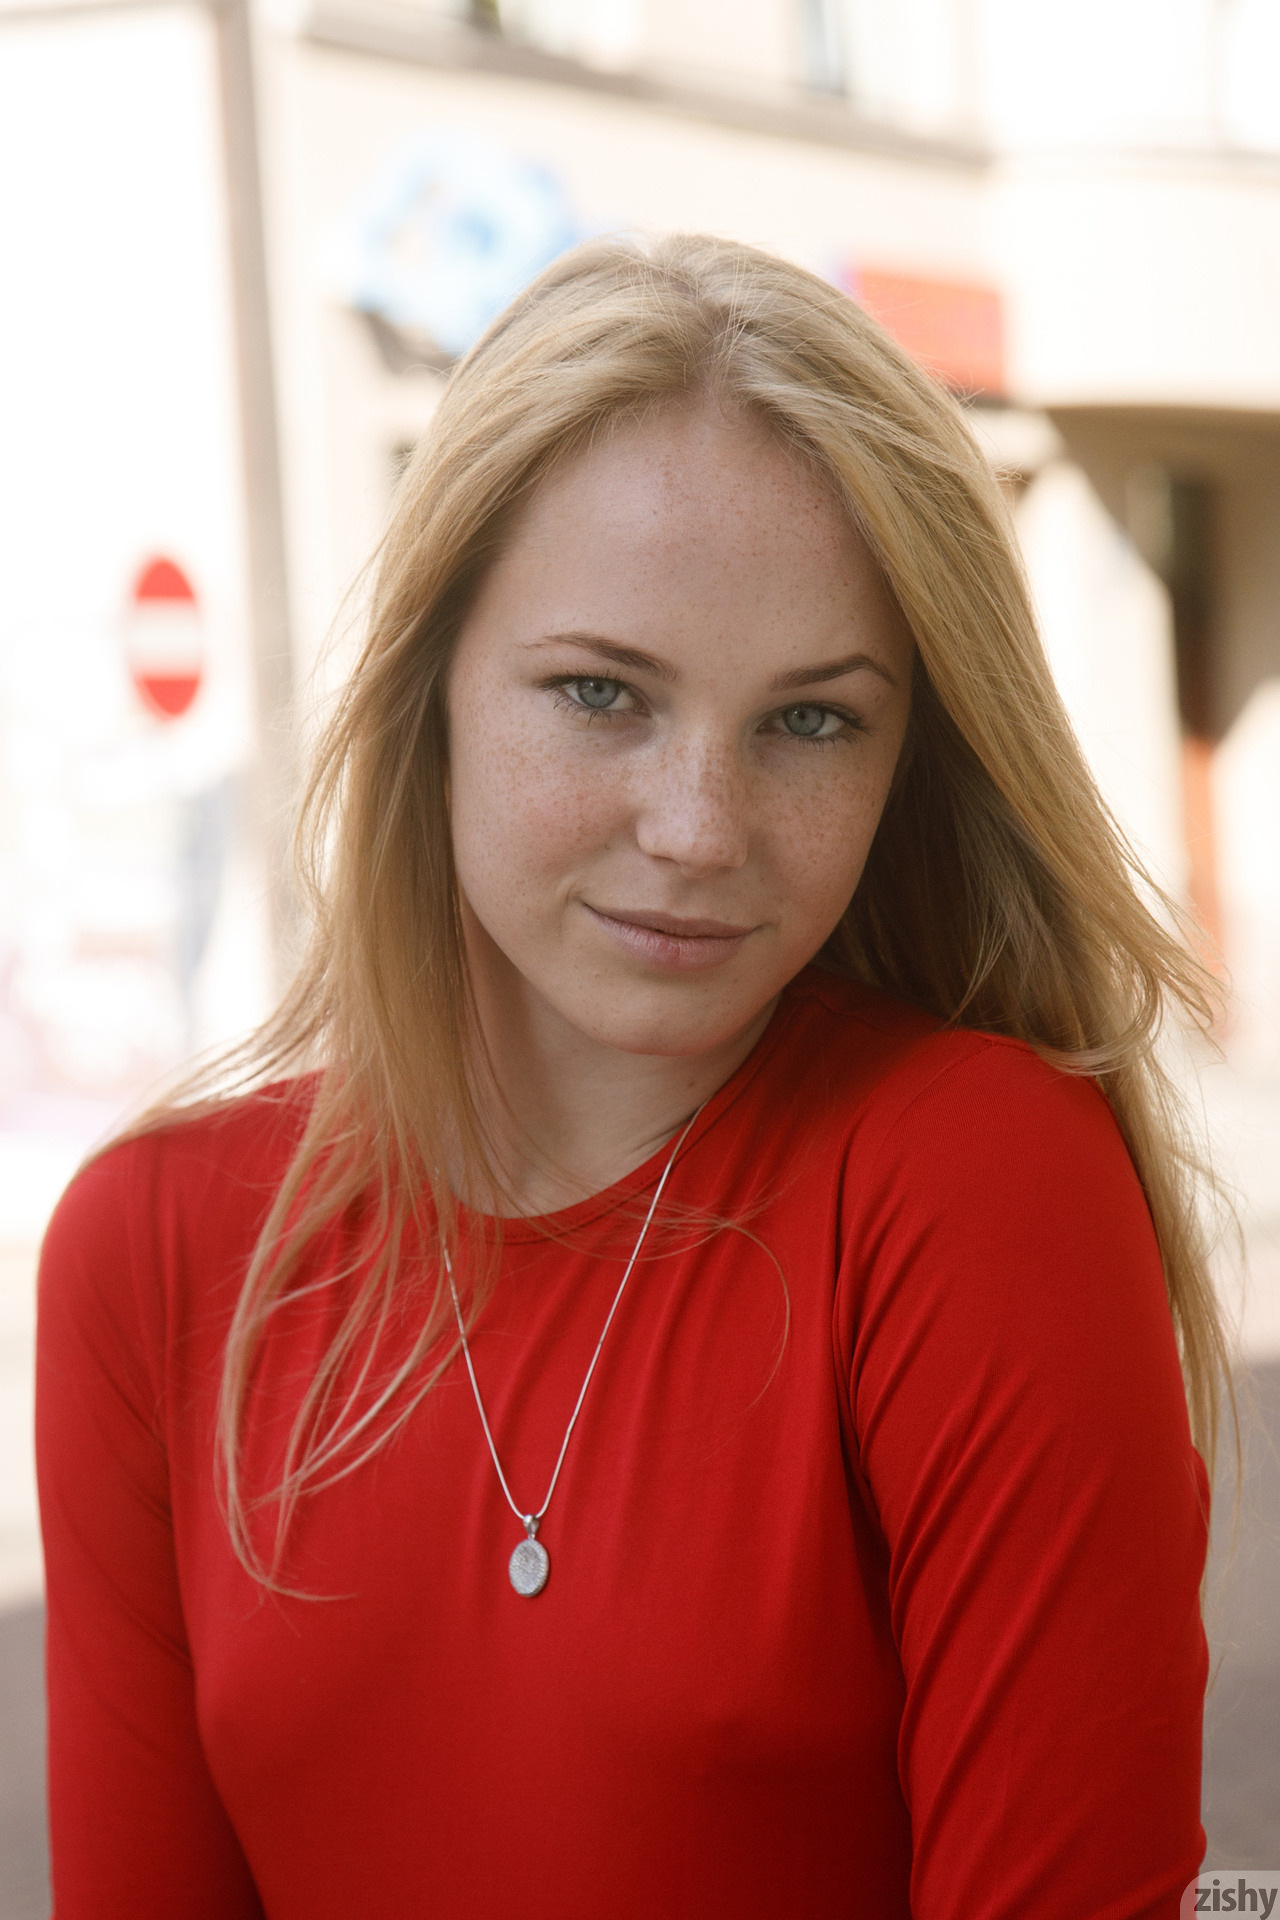 People 1280x1920 Rune Kimele Zishy blonde women outdoors freckles looking at viewer depth of field necklace women model face portrait display blue eyes red shirt watermarked